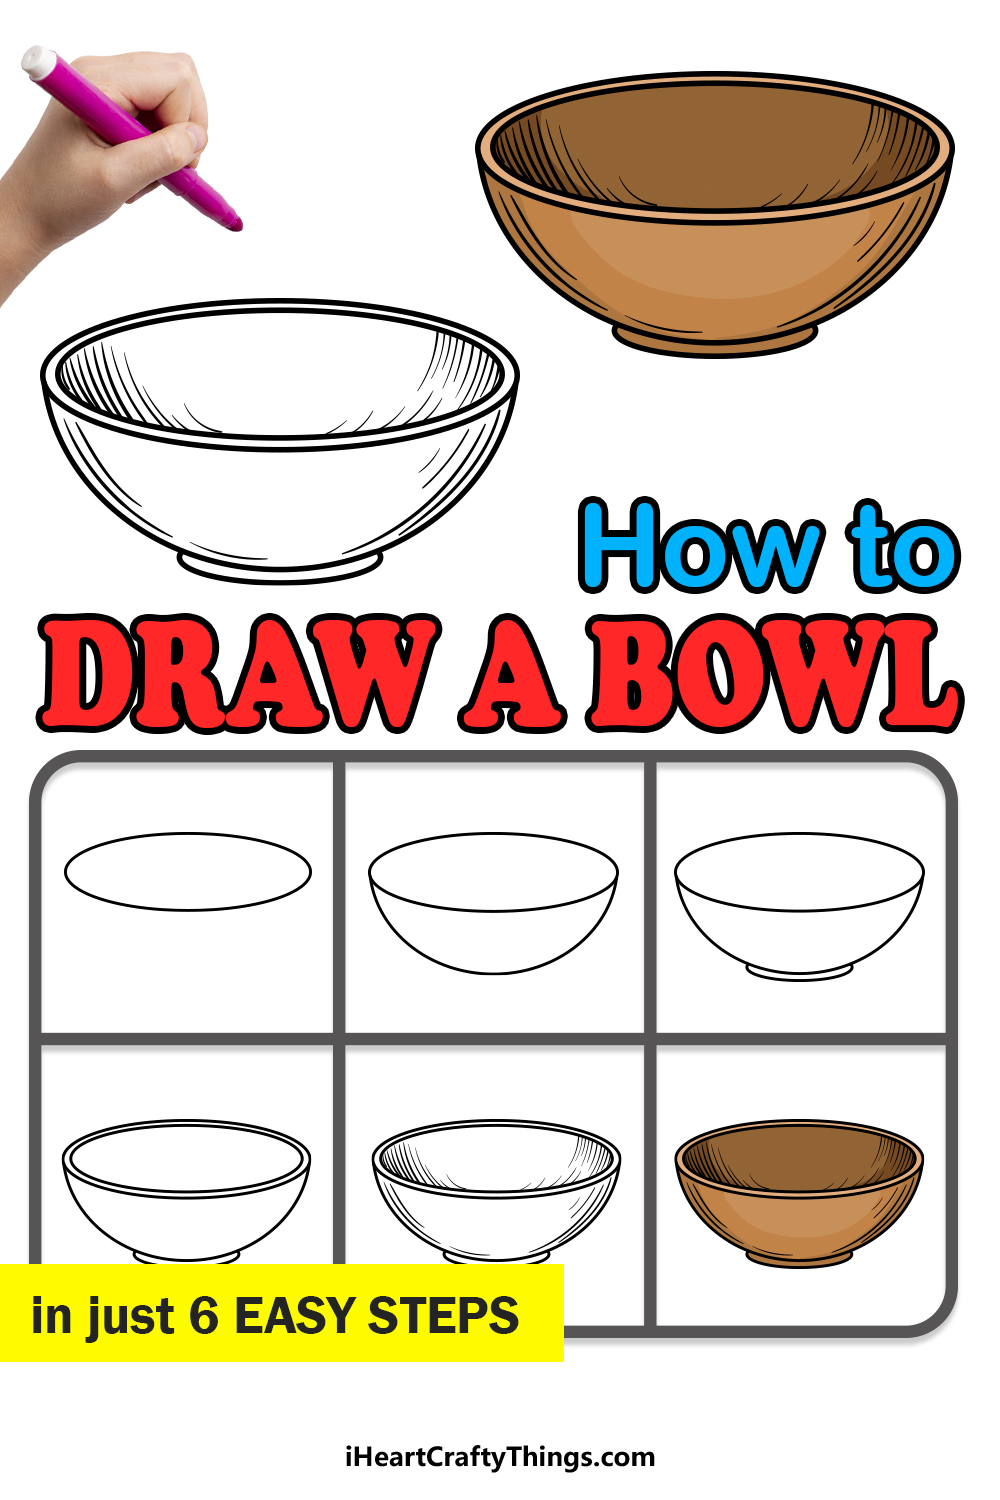 how to draw a Bowl in 6 easy steps